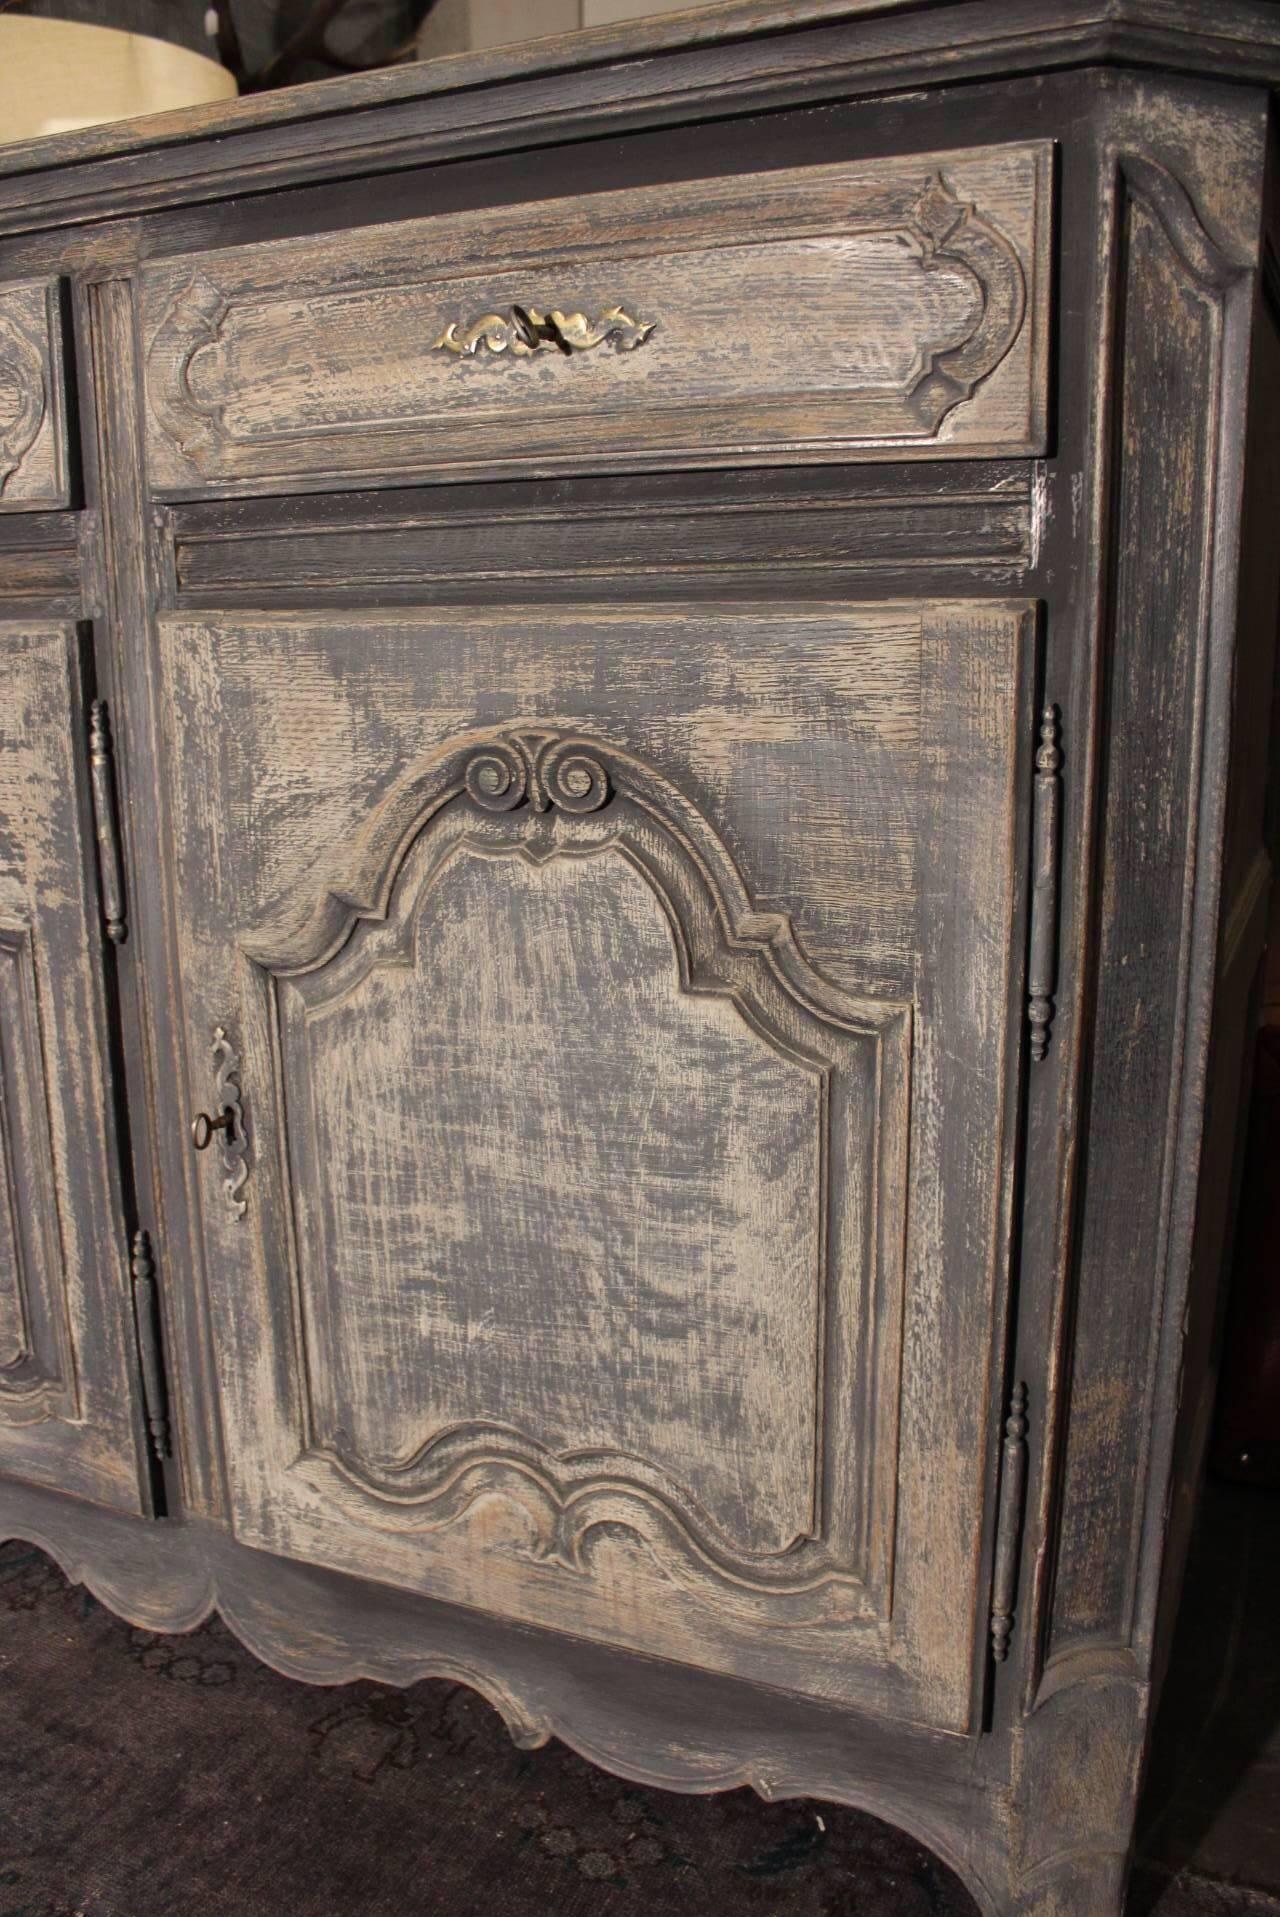 Nice oak dresser from circa 1850
Louis XVI dark grey destressed painted 3 door dresser.
From the Lyon area made piece.
With very nice carvings in the doorspanels and fine moldings on the corners and drawers.
excellent quality furniture.